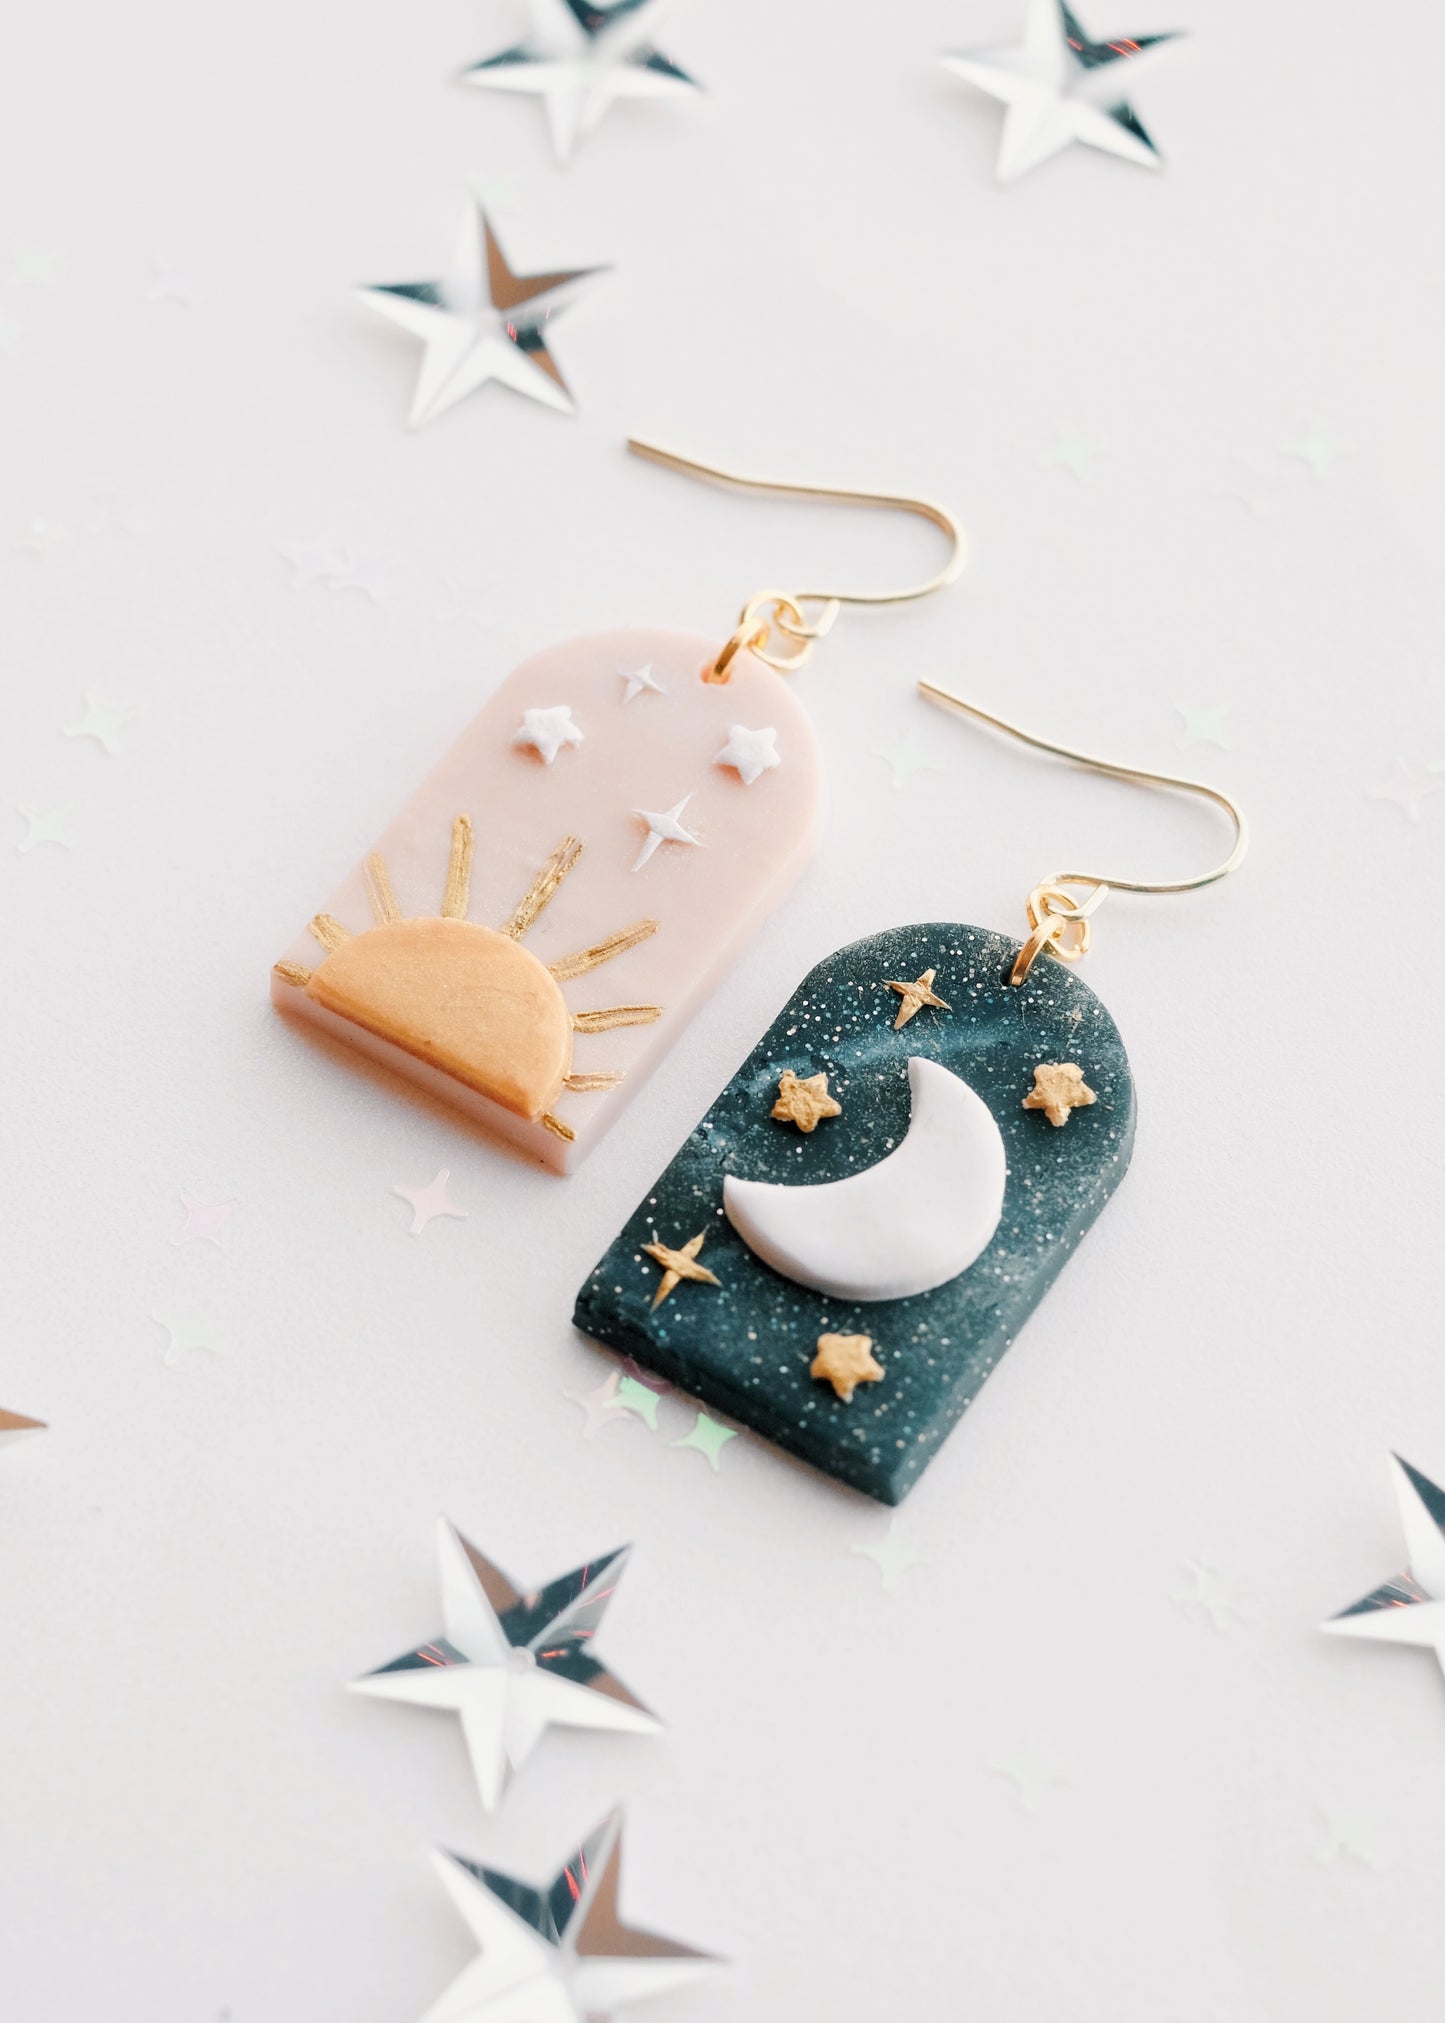 Whimsical polymer clay gold jewelry and goods for sale | Handmade and curated in Phoenix, Arizona by Meghan | Cottage core aesthetic jewelry